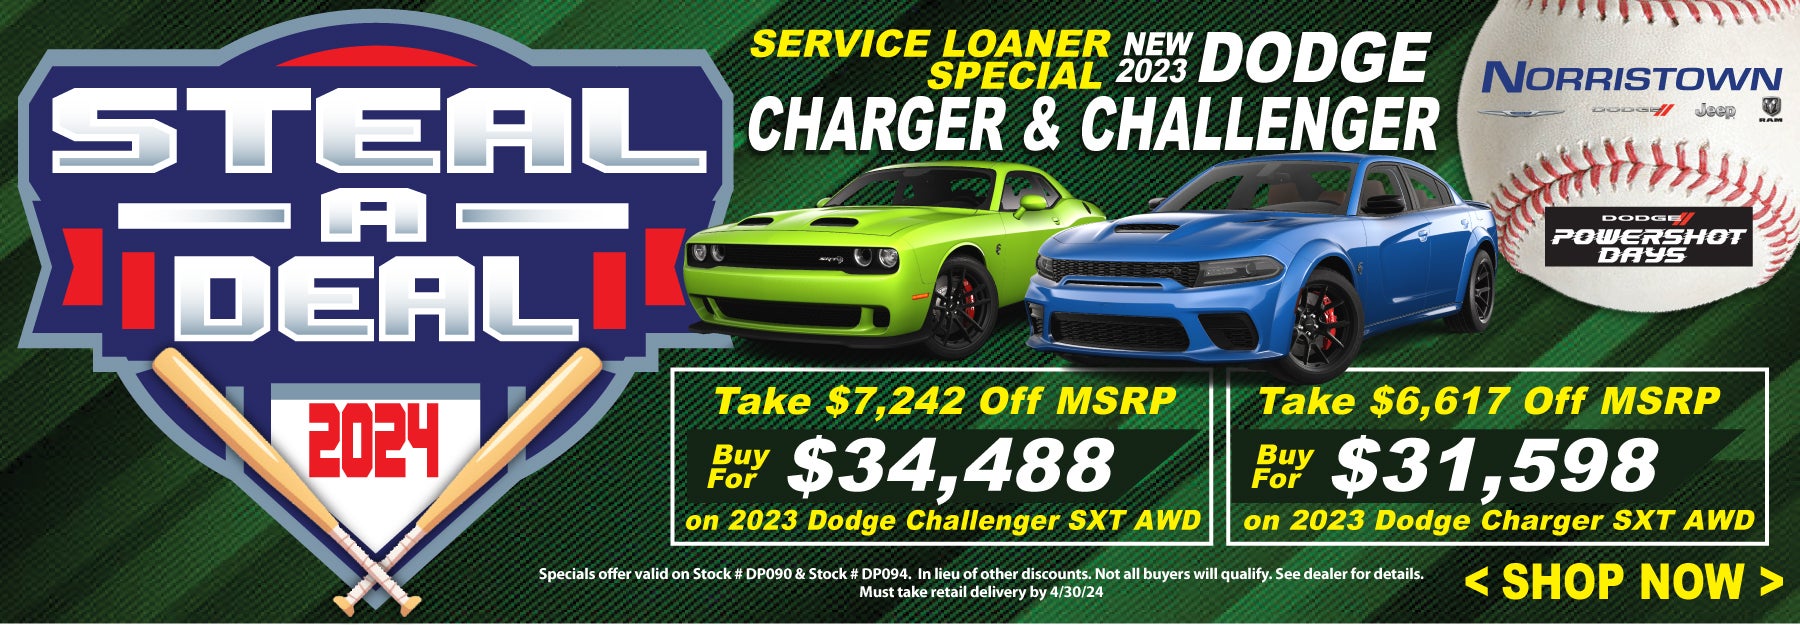 Charger/Challenger